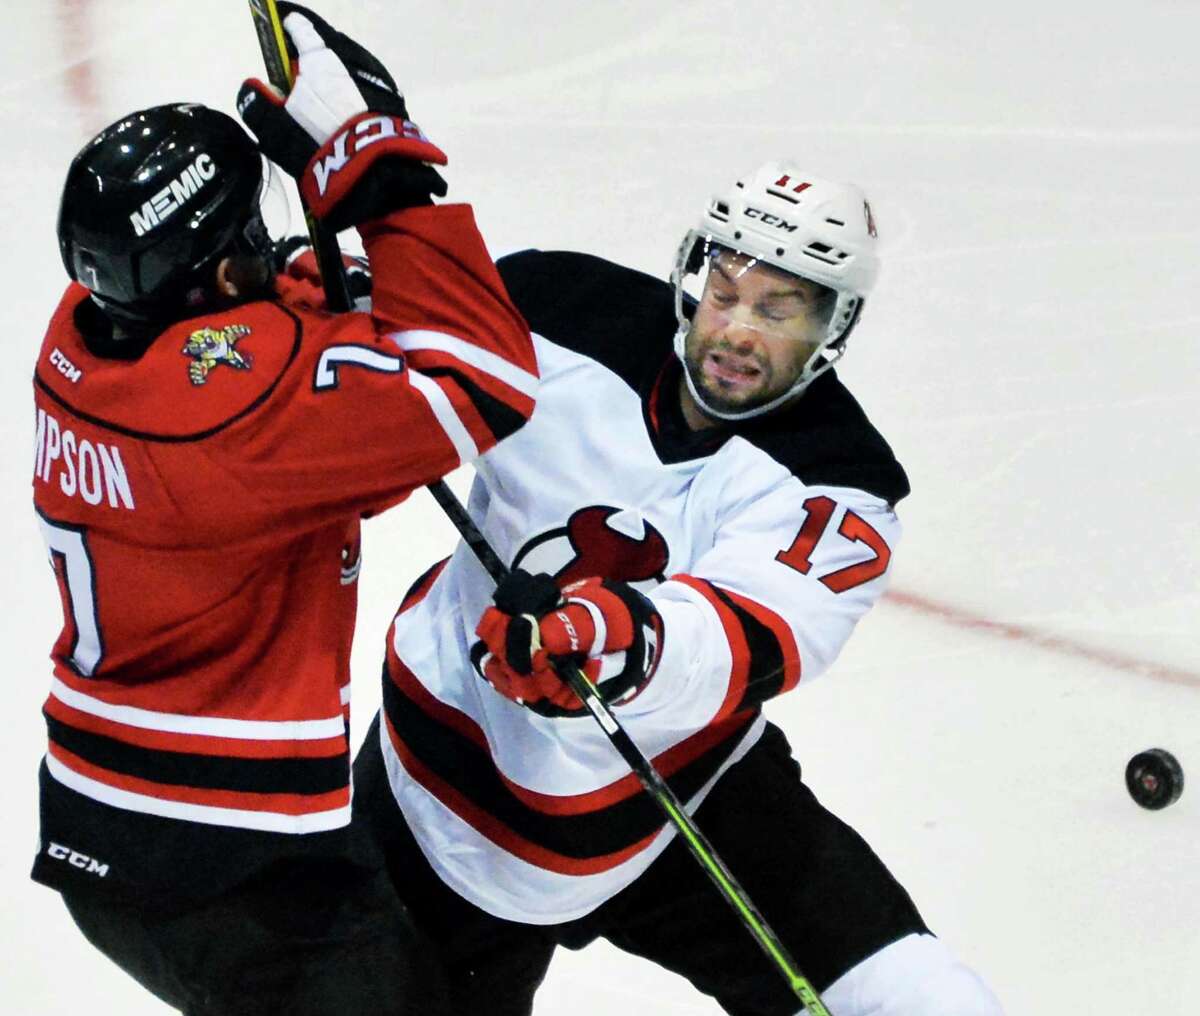 Albany Devils' #17 Marc-Andre Gragnani, right, battles Portland Pirates' #7 Wayne Simpson for the puck during Saturday's game at the Times Union Center Oct. 24, 2015 in Albany, NY. (John Carl D'Annibale / Times Union) ORG XMIT: MER2015102419101720